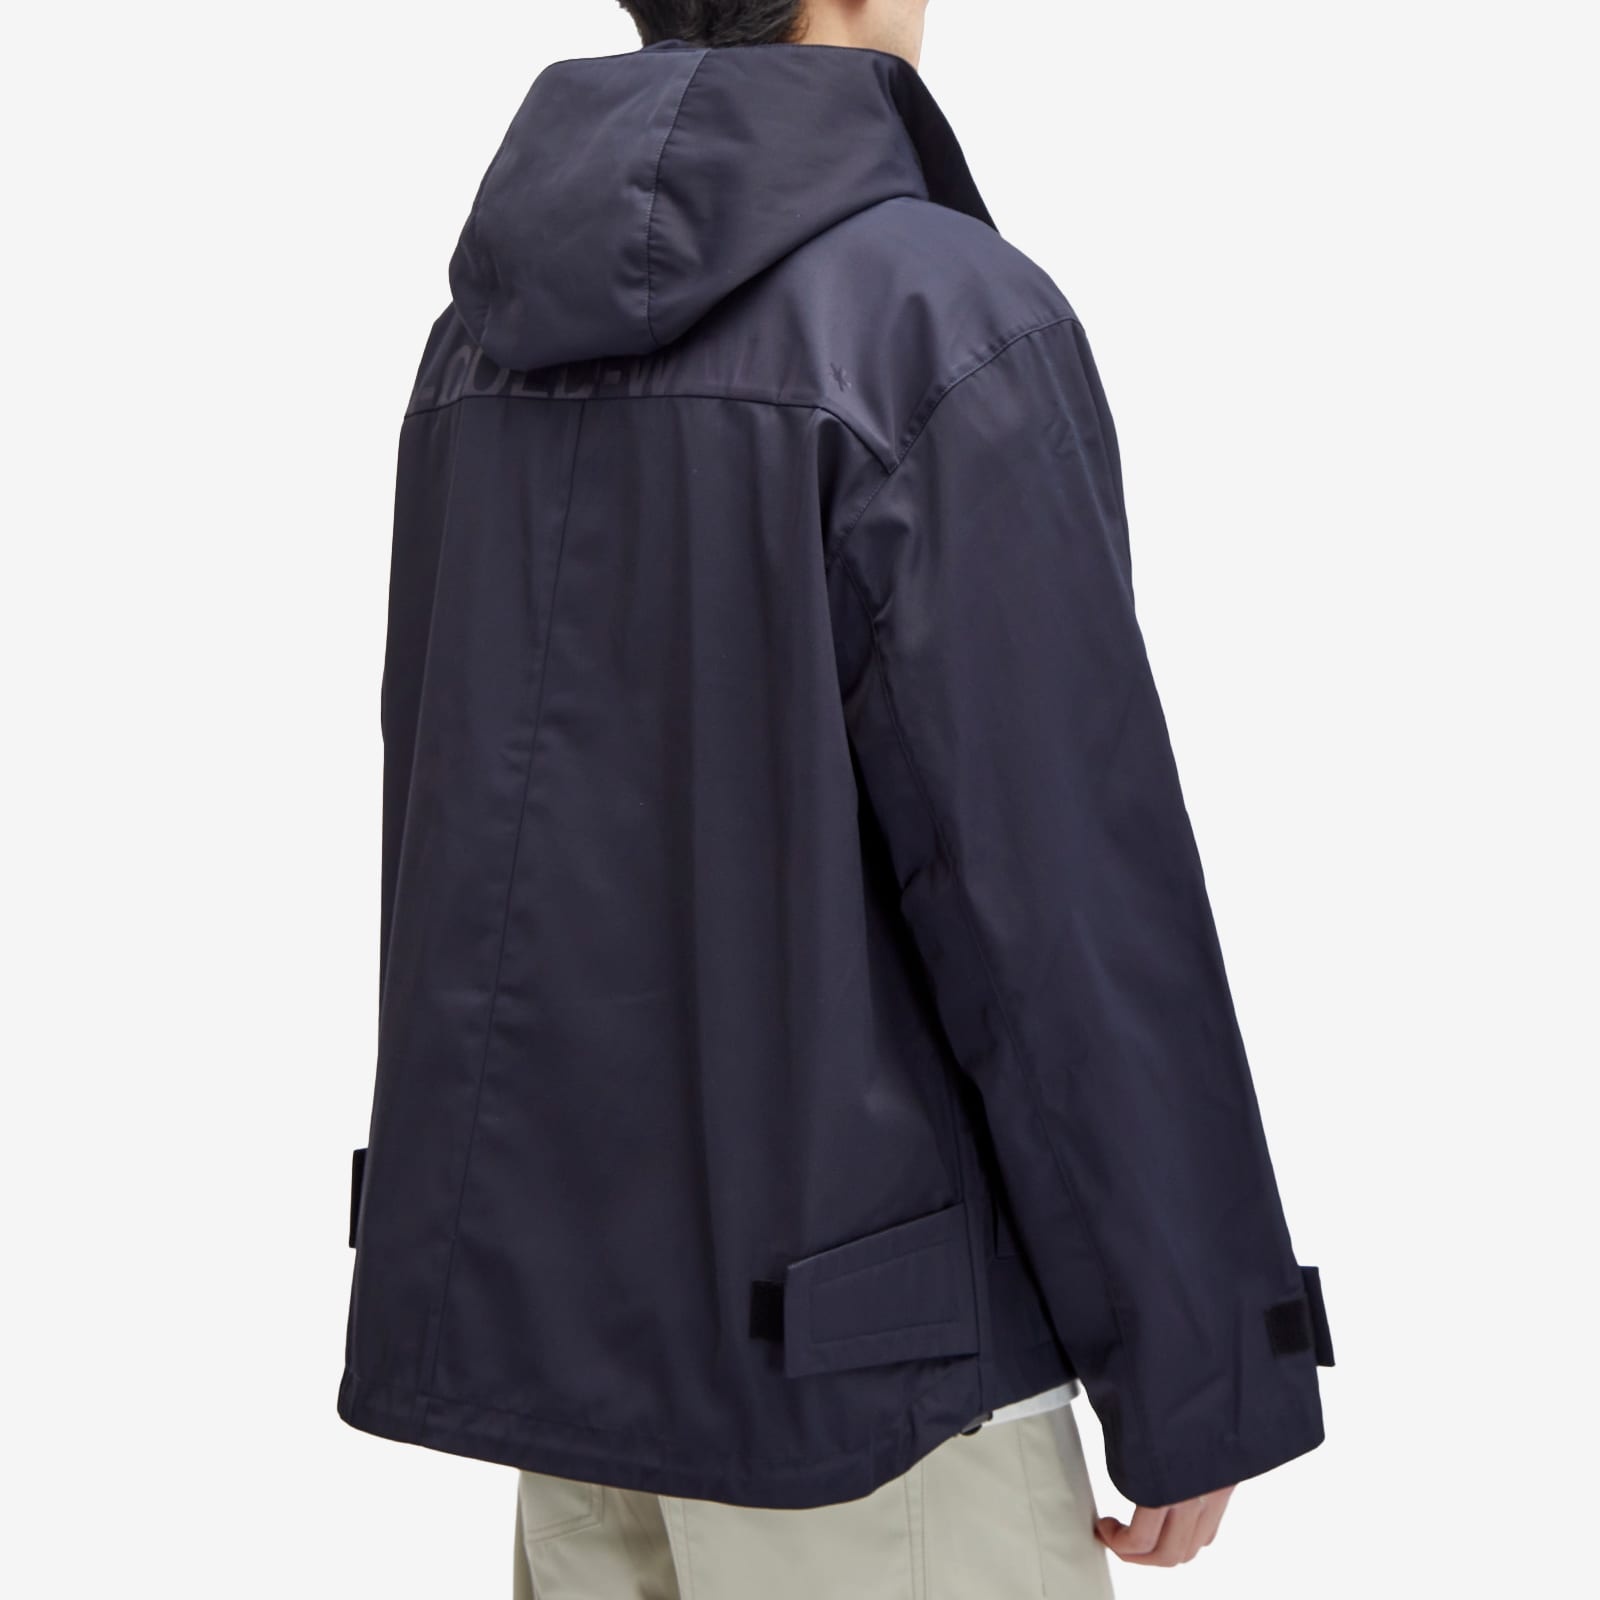 A-COLD-WALL* Gable Storm Jacket - 3